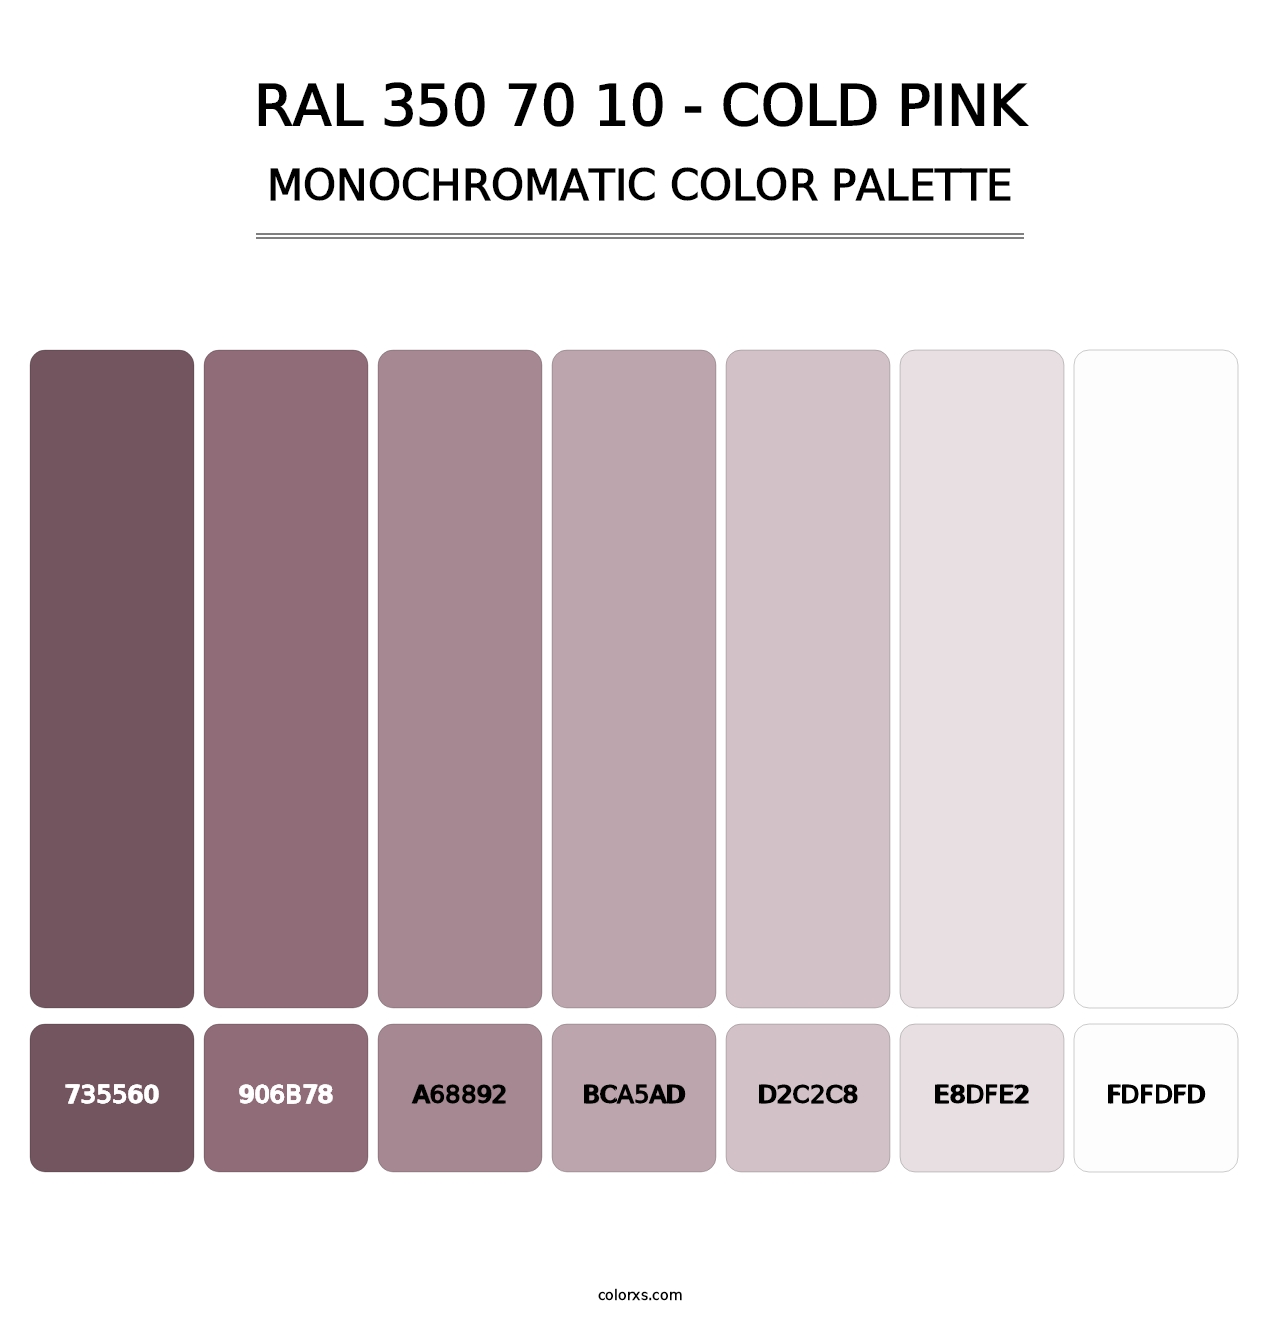 RAL 350 70 10 - Cold Pink - Monochromatic Color Palette